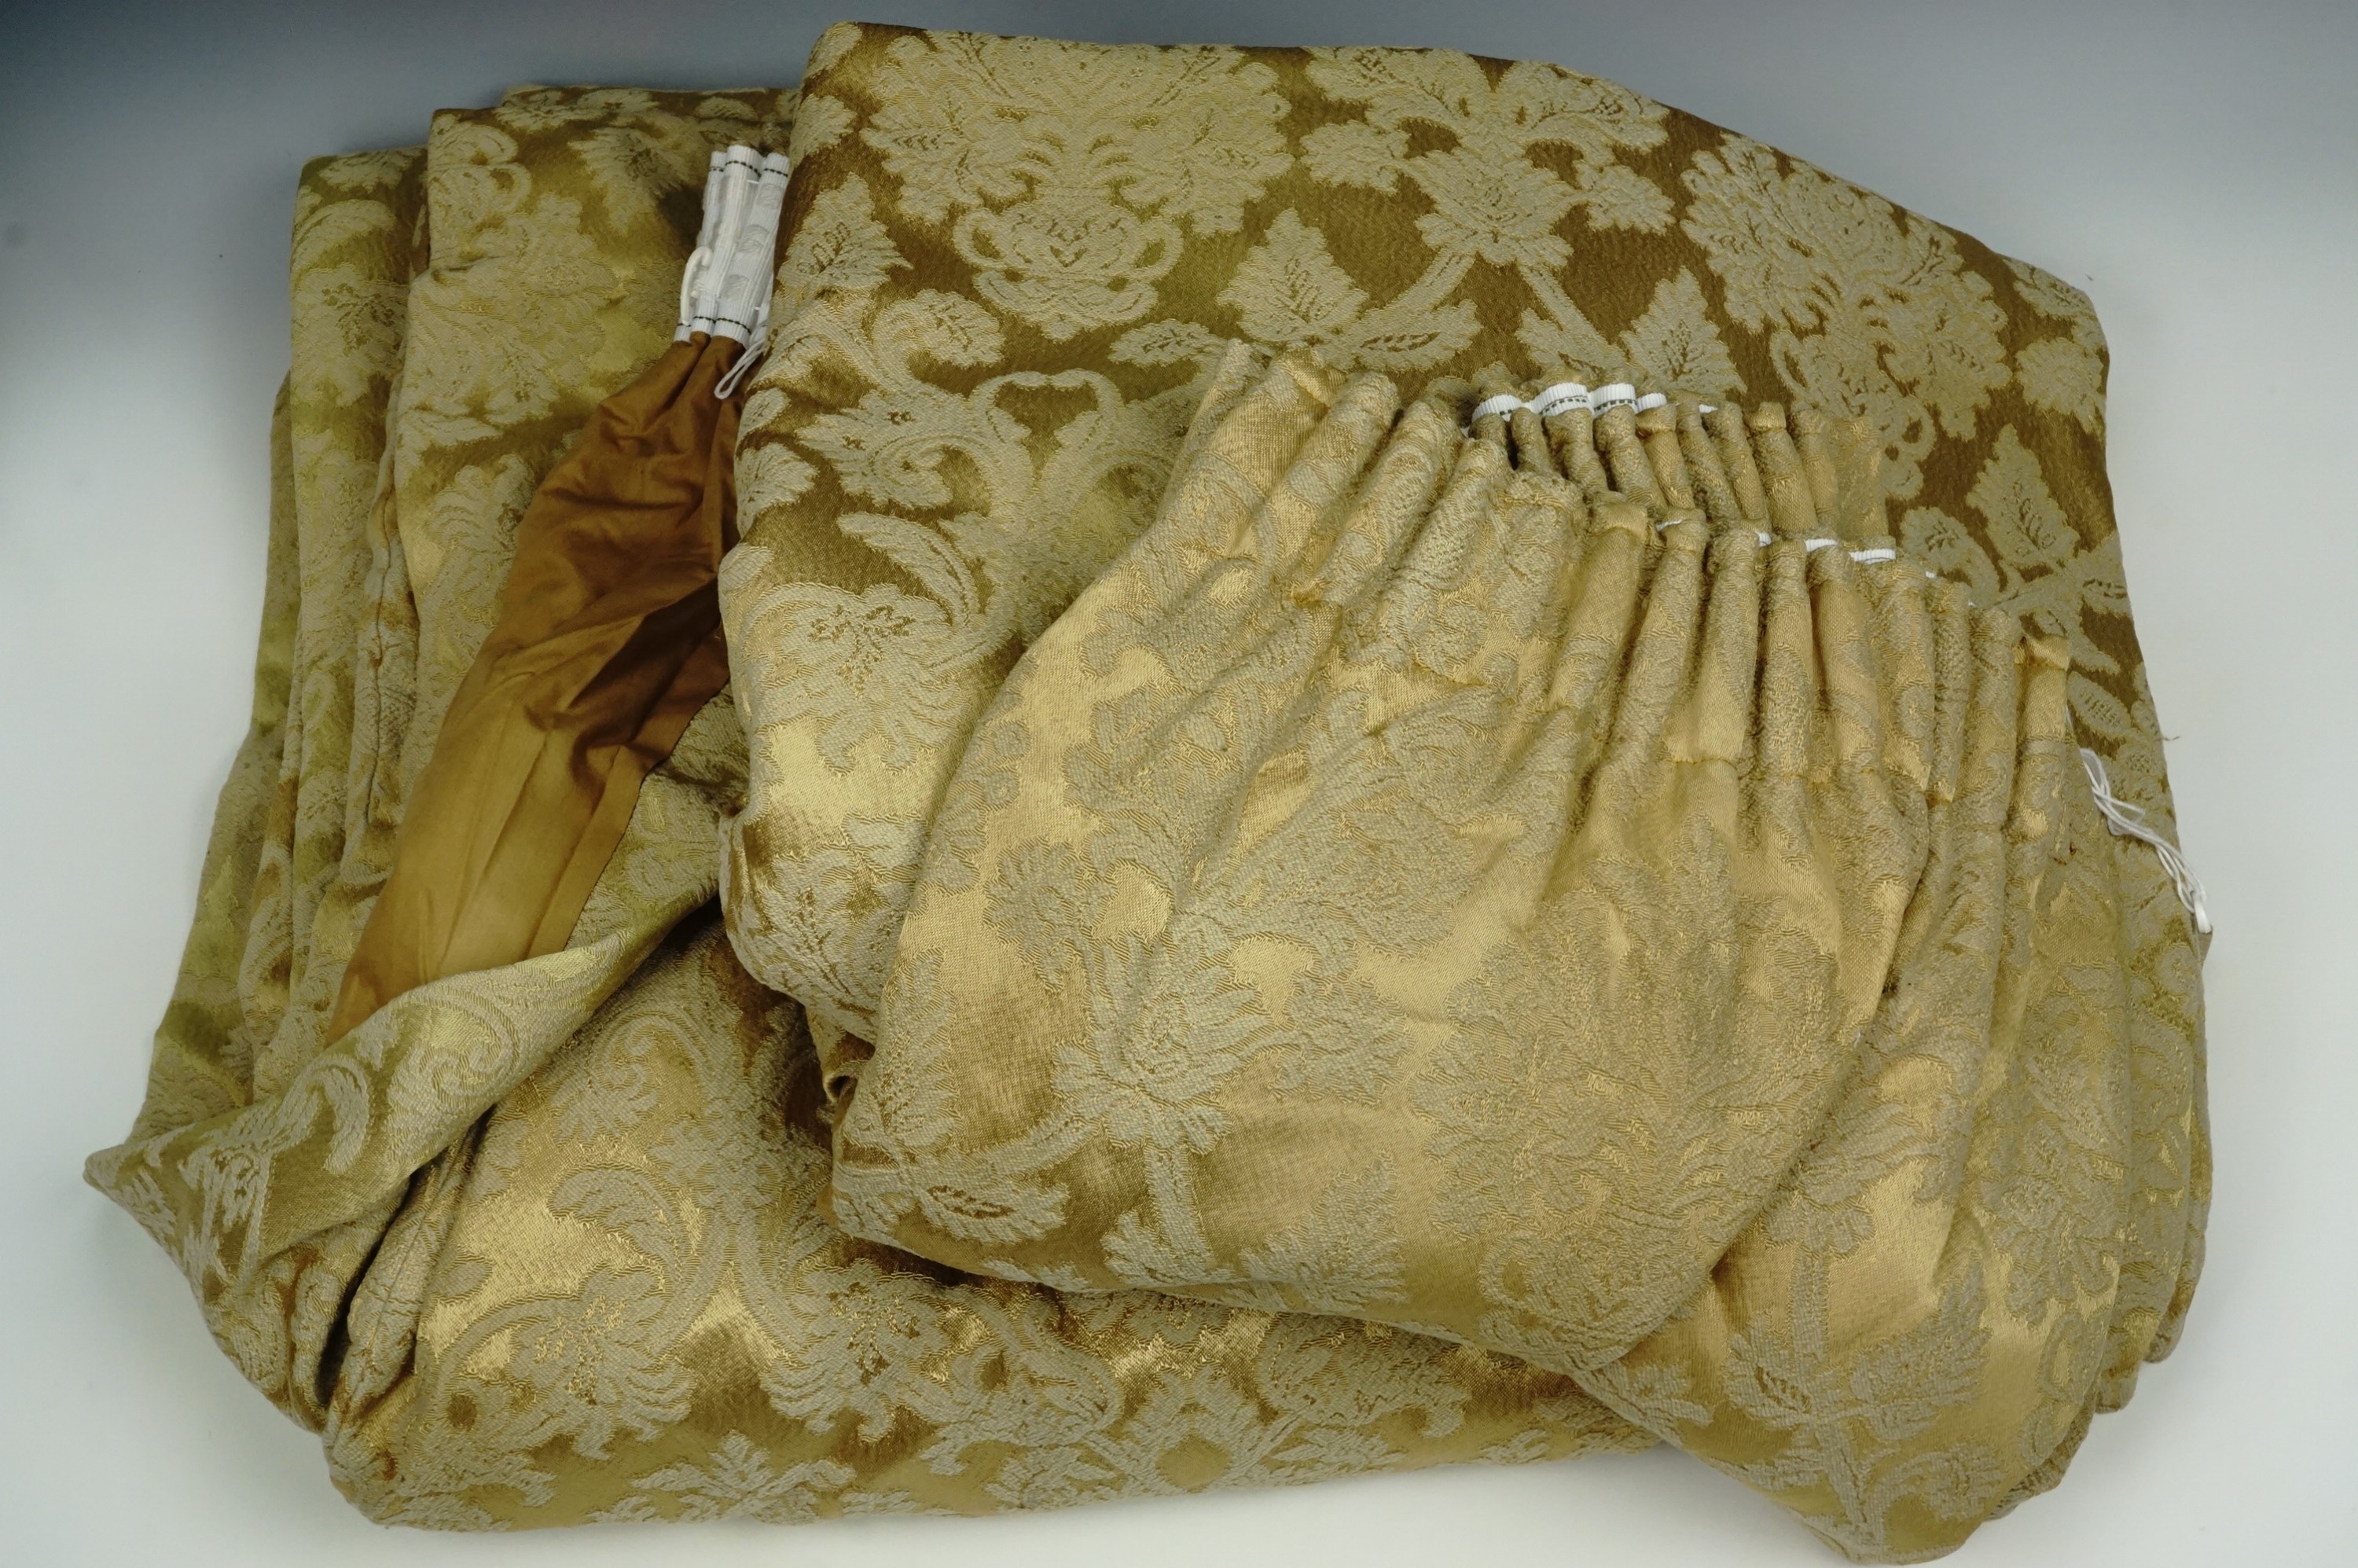 A large pair of gold damask curtains including a heavily fringed panel for a pelmet